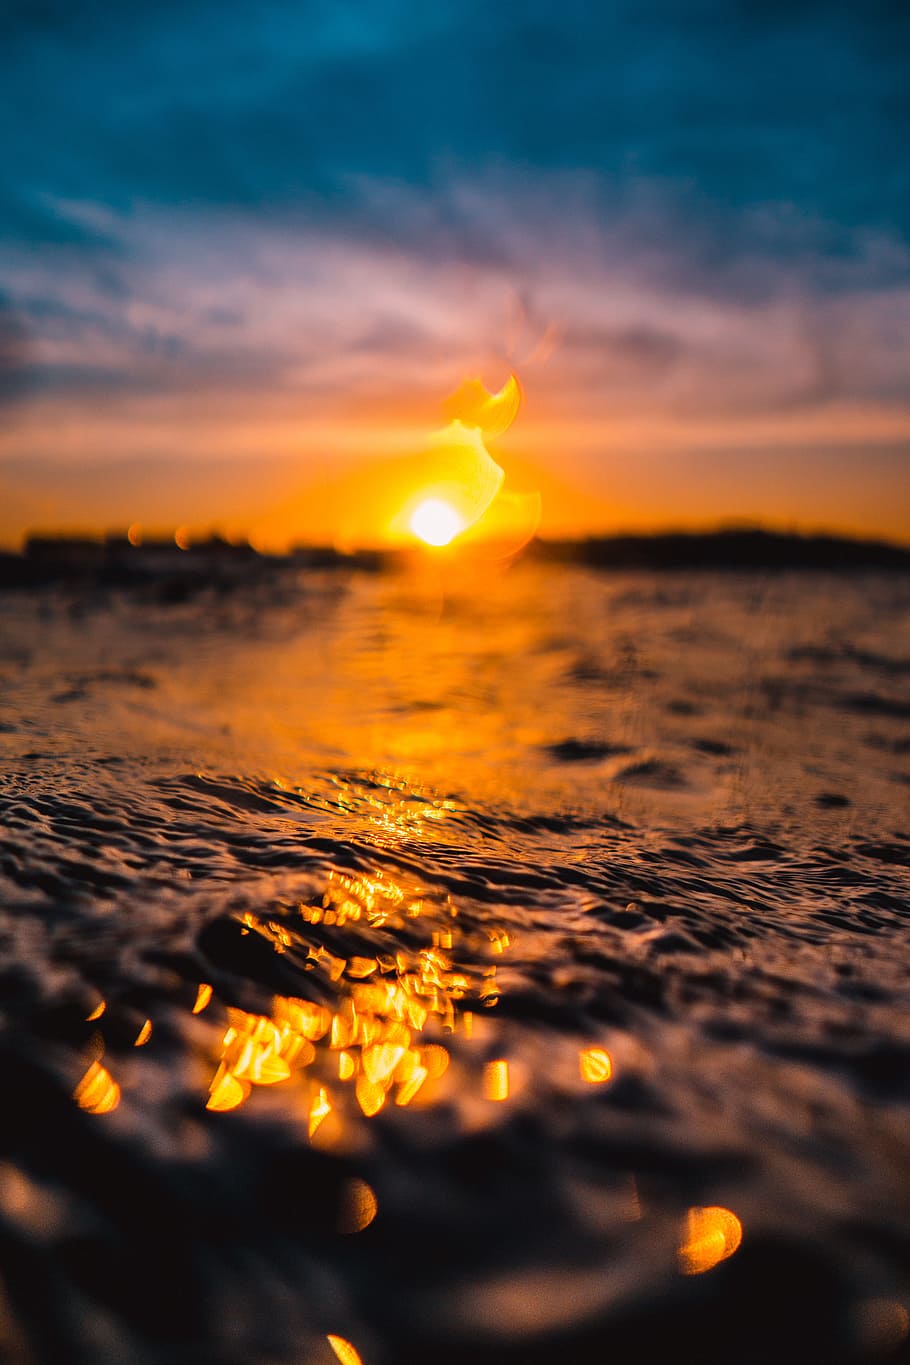 HD wallpaper depth of field photography of body of water during golden hour   Wallpaper Flare